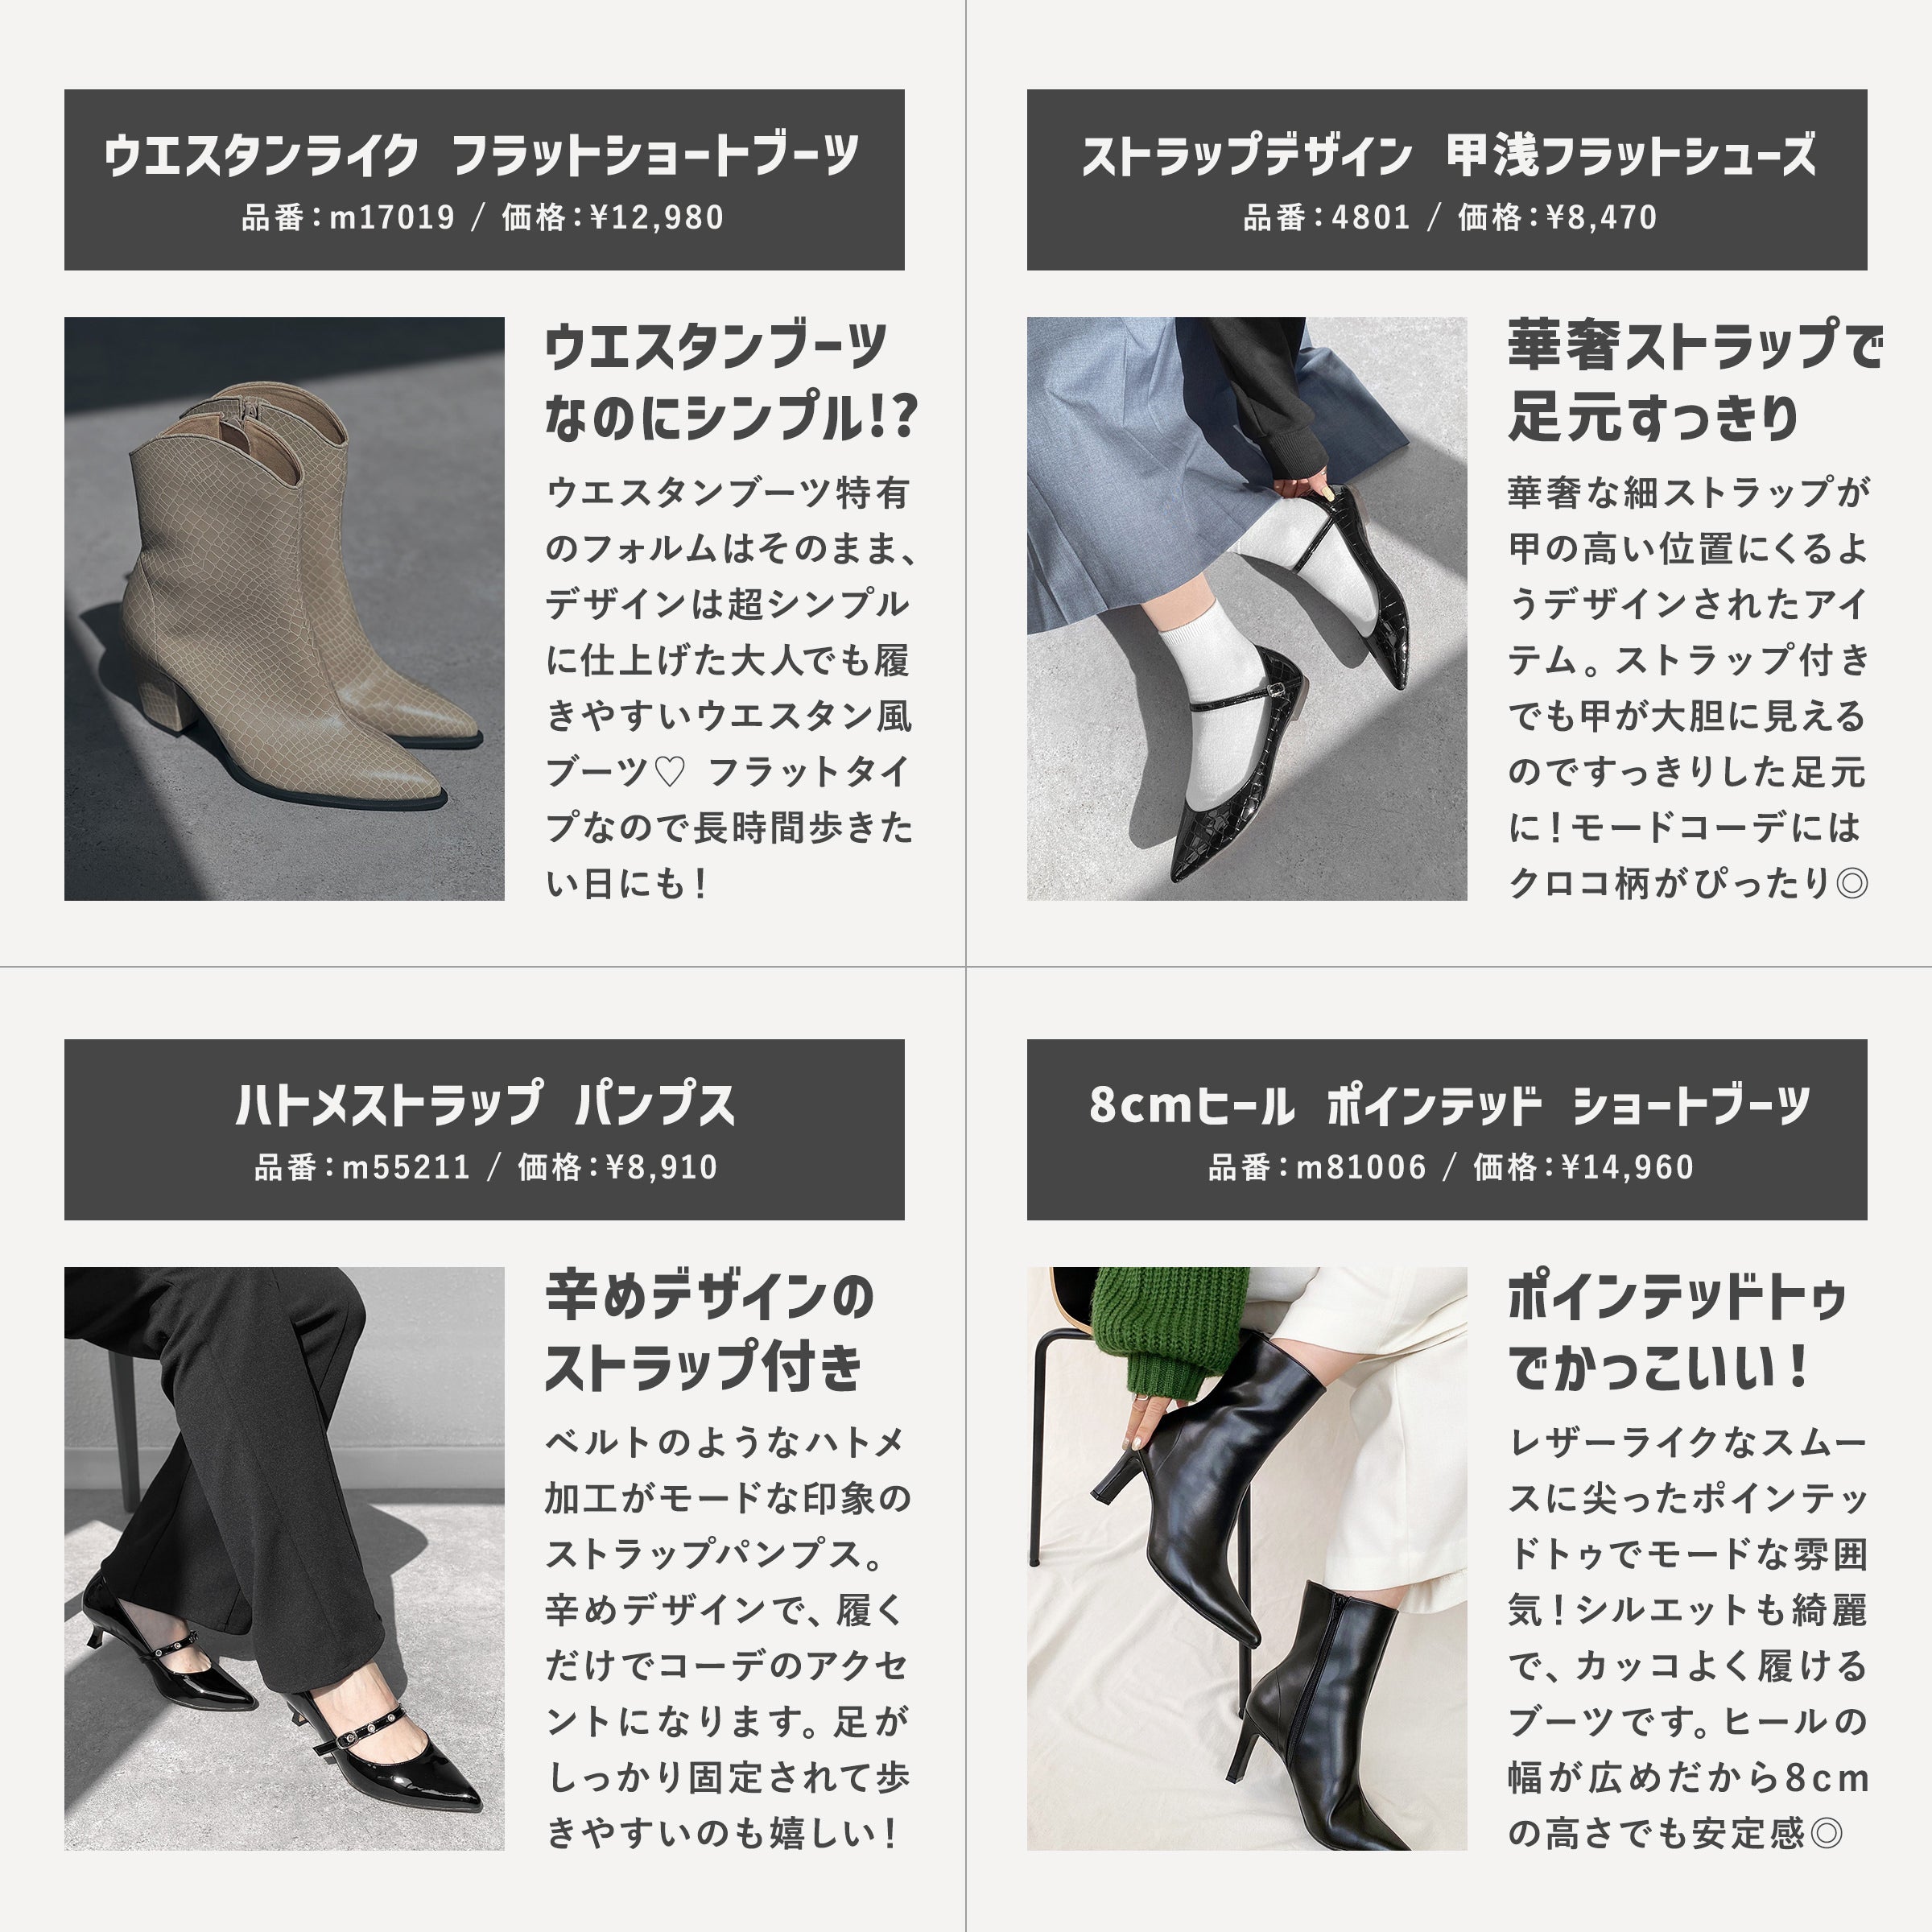 For the day you want to look cool! Special feature on fashion shoes